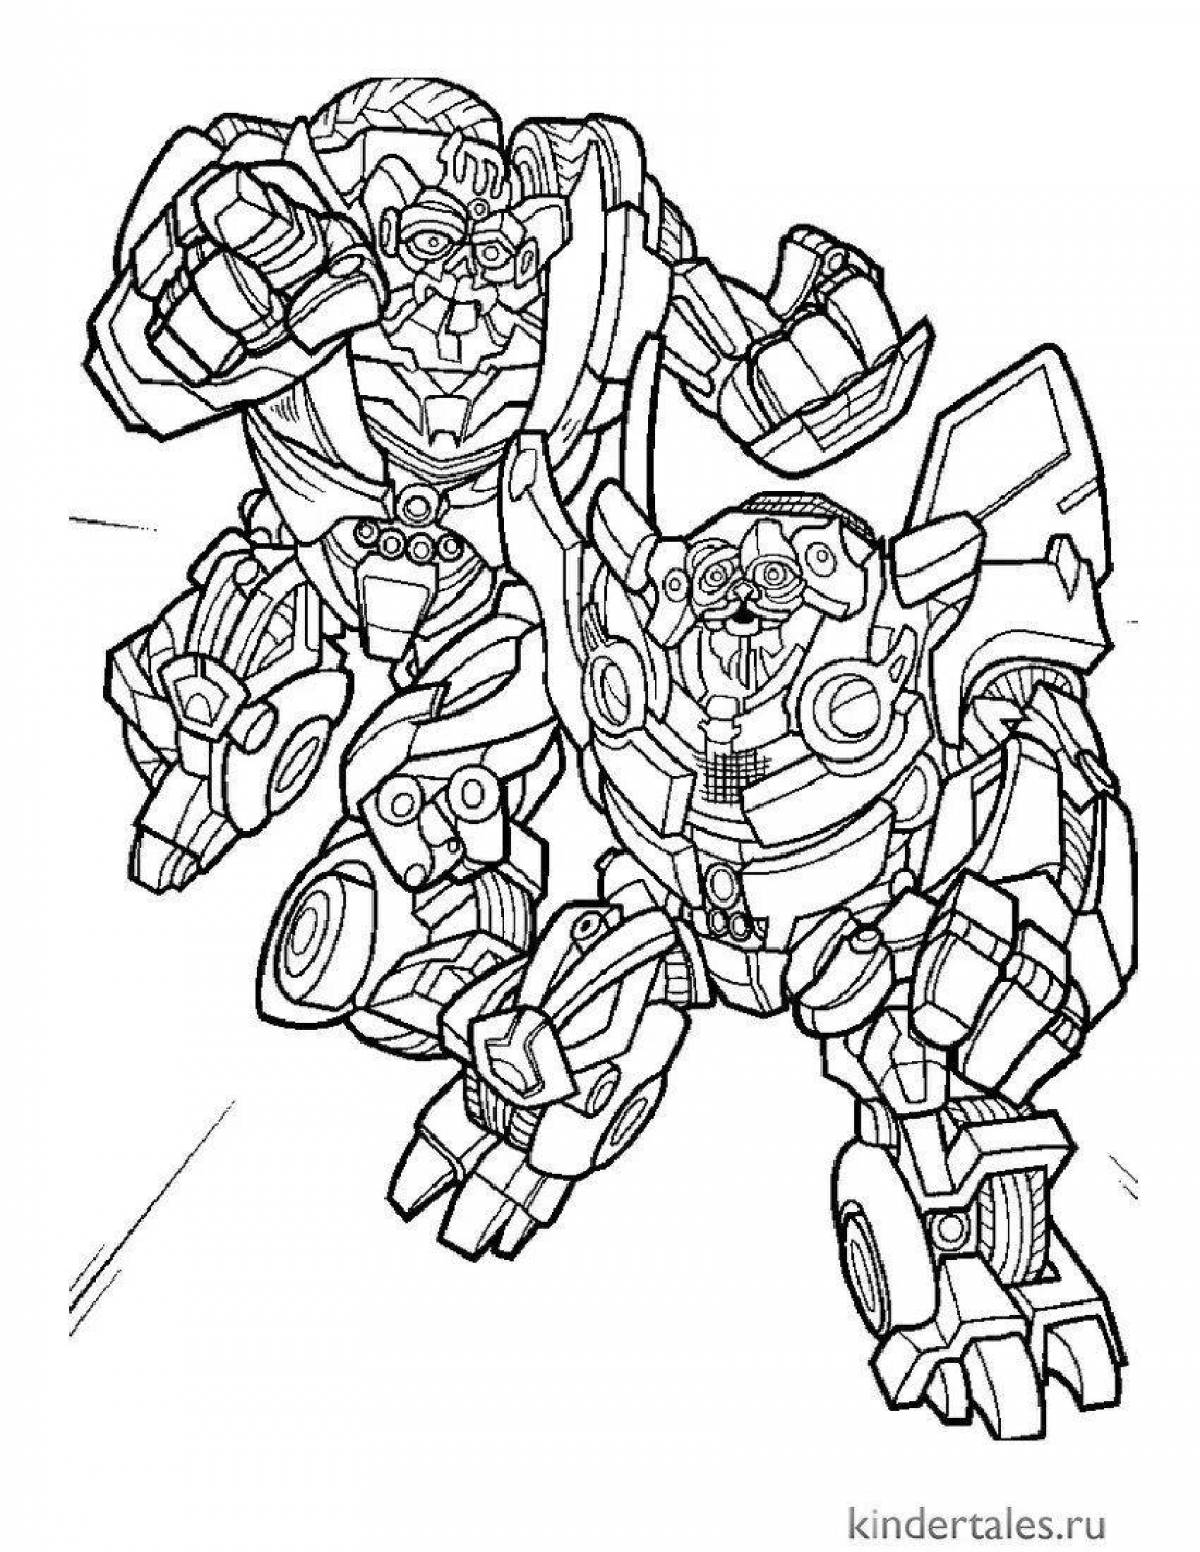 Creative bumblebee coloring page